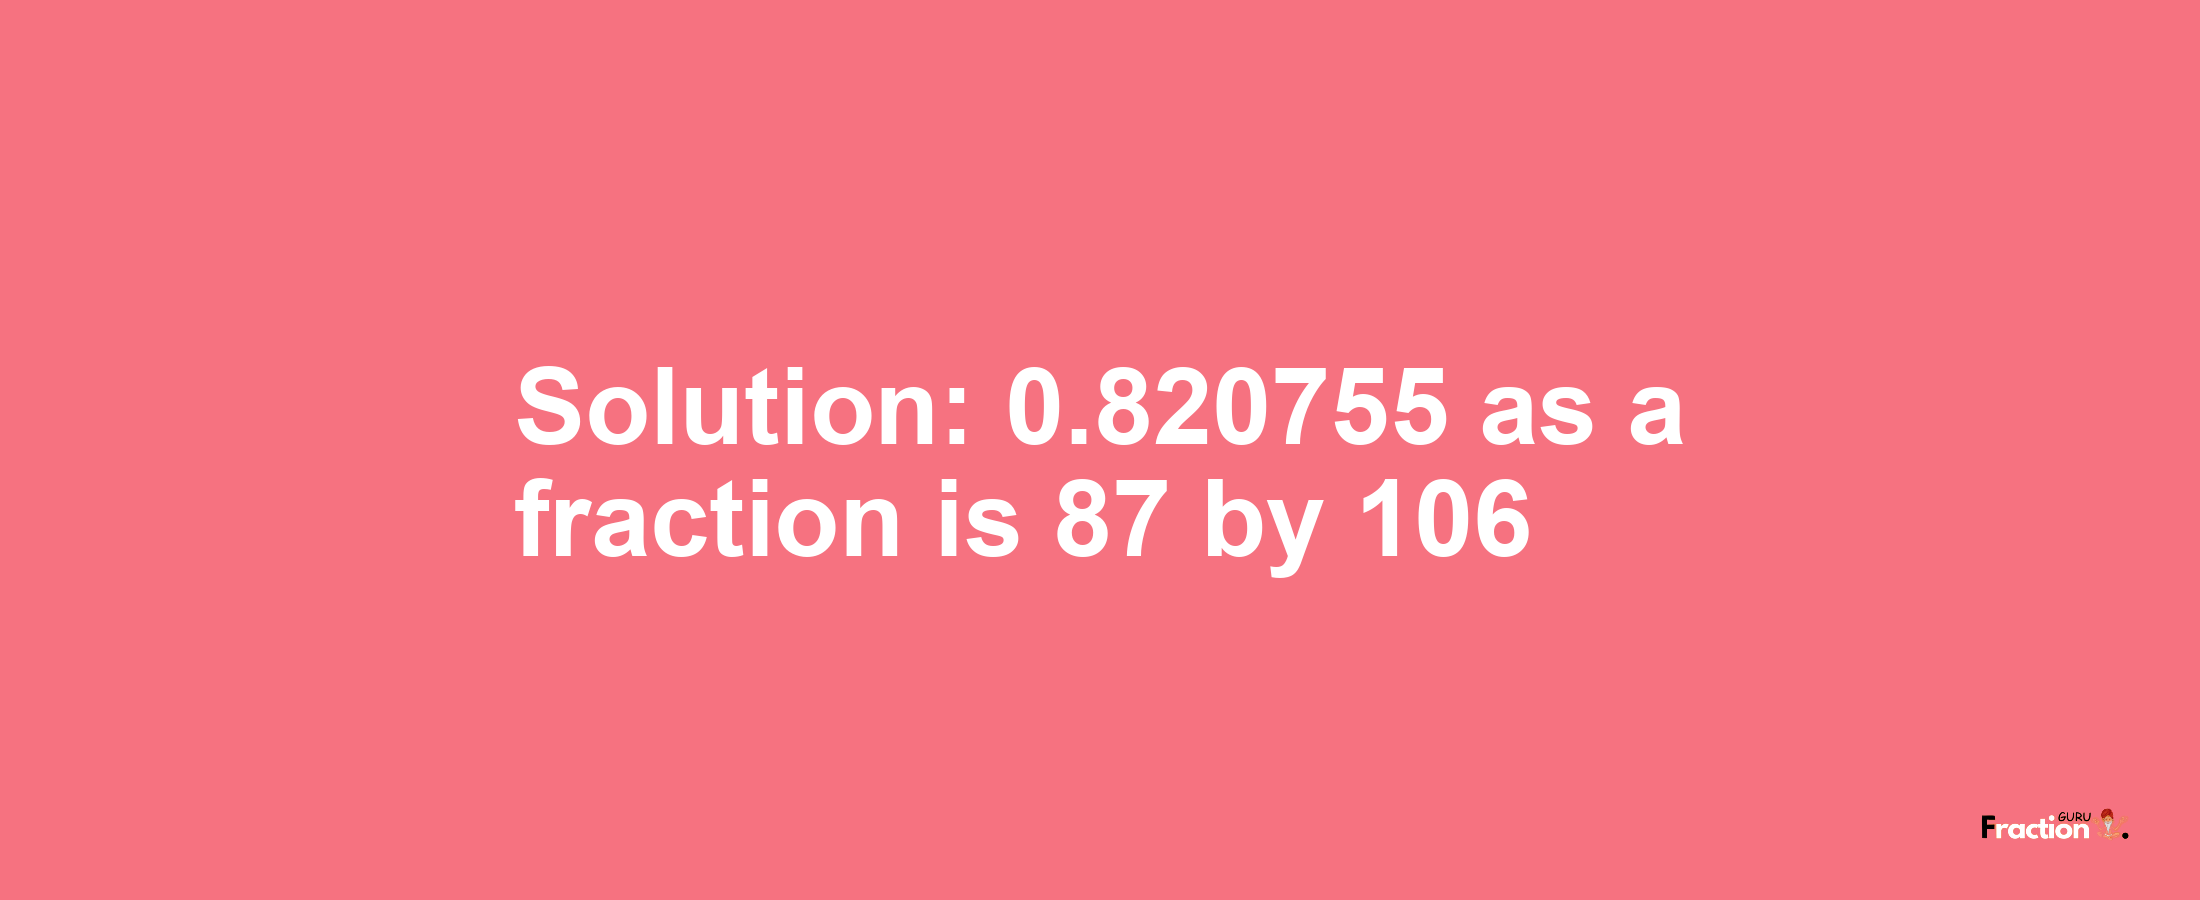 Solution:0.820755 as a fraction is 87/106